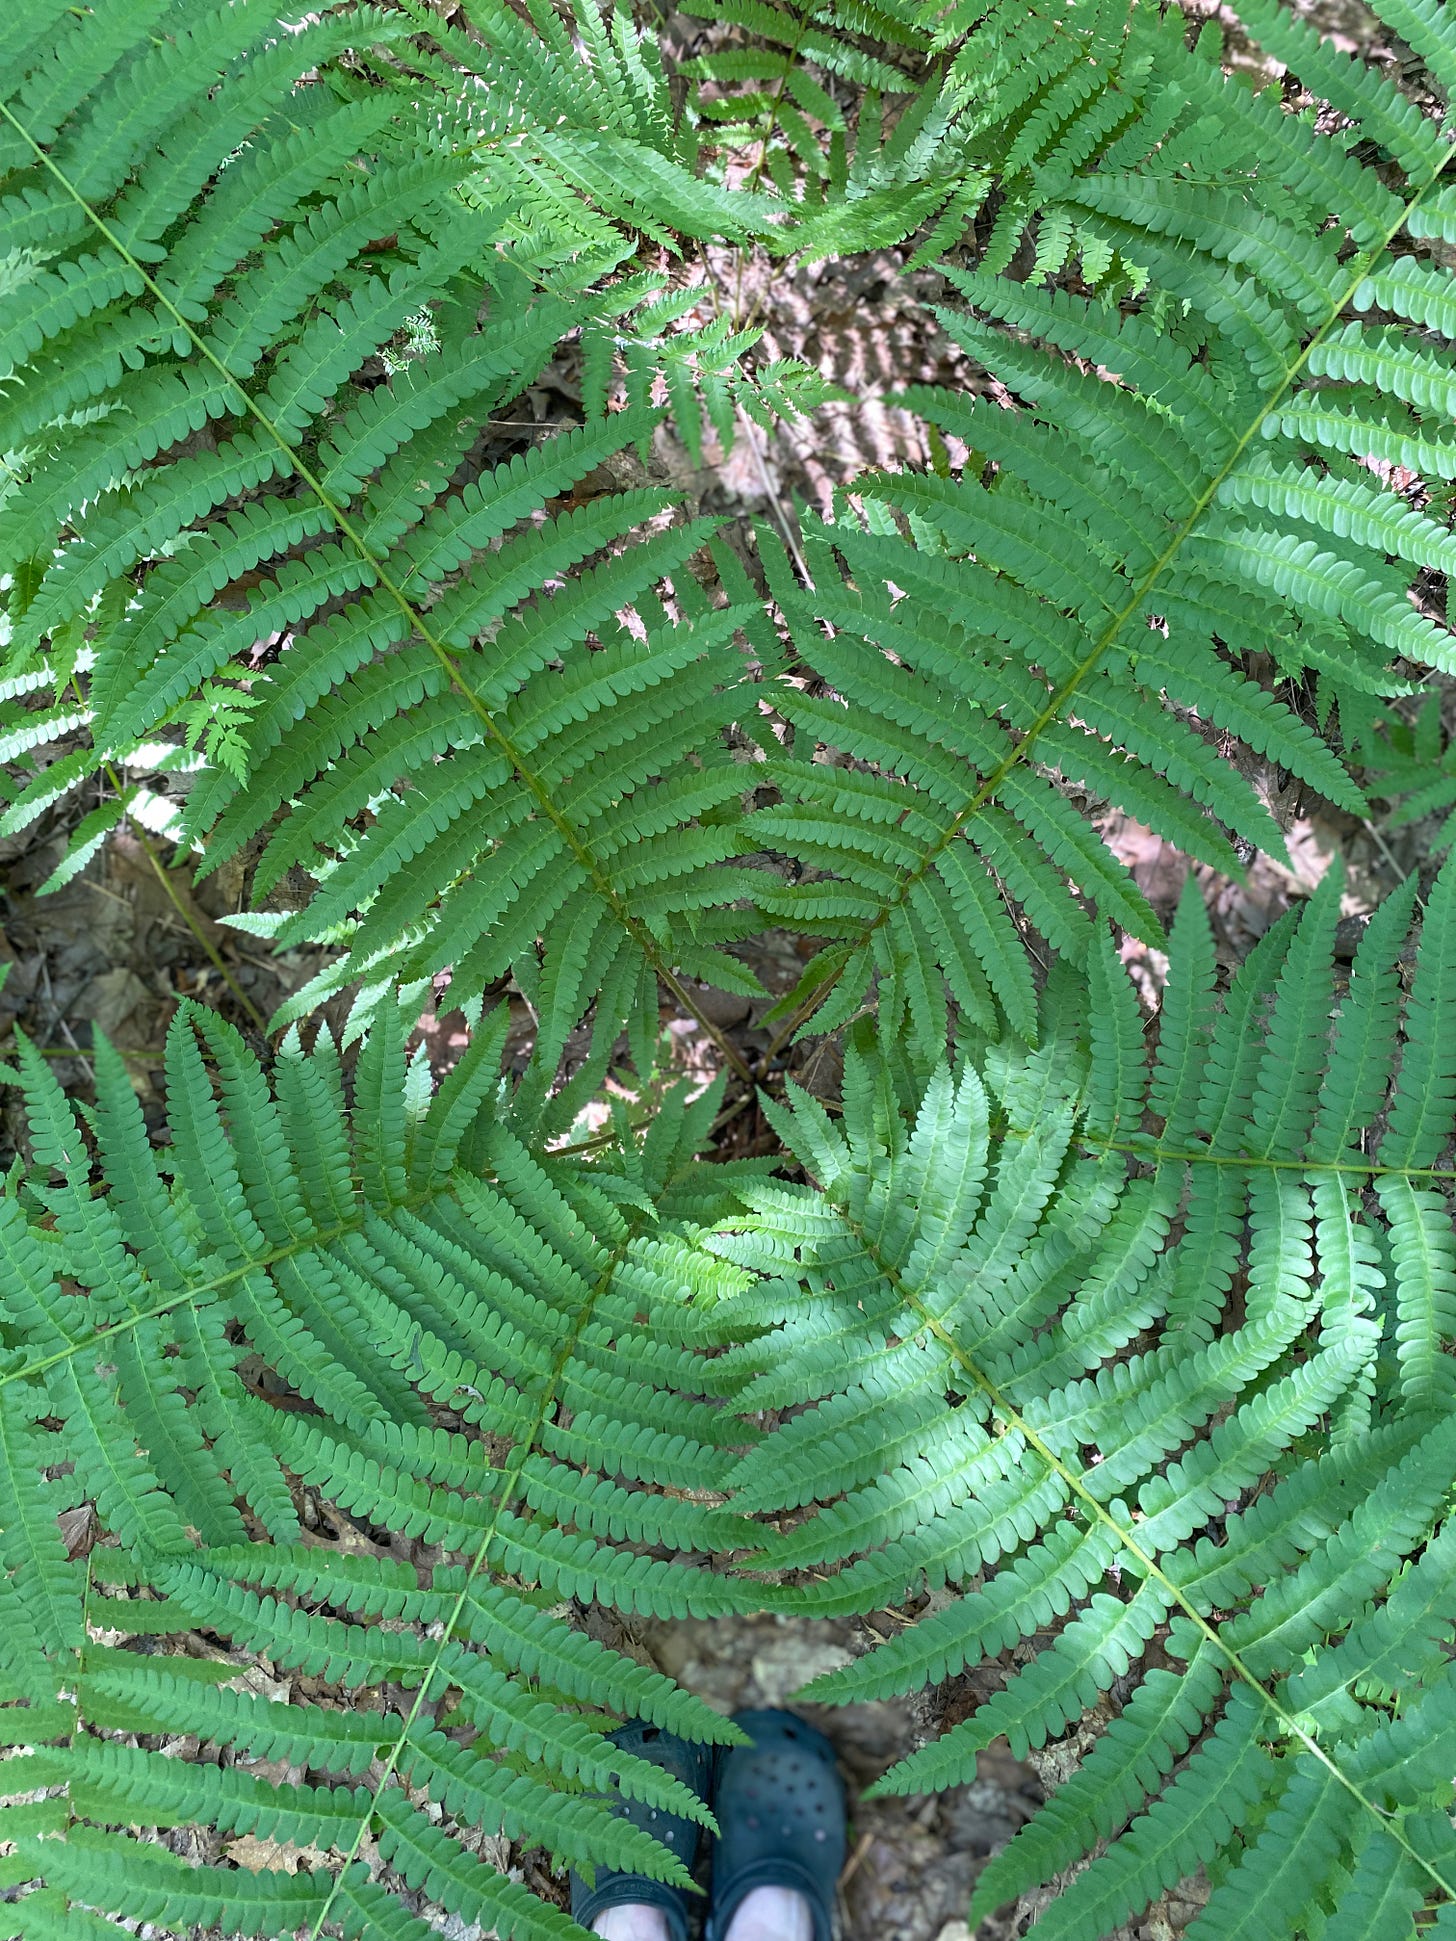 Closeup of a large fern, its fronds radiating outward in a circle. It’s dappled with light.